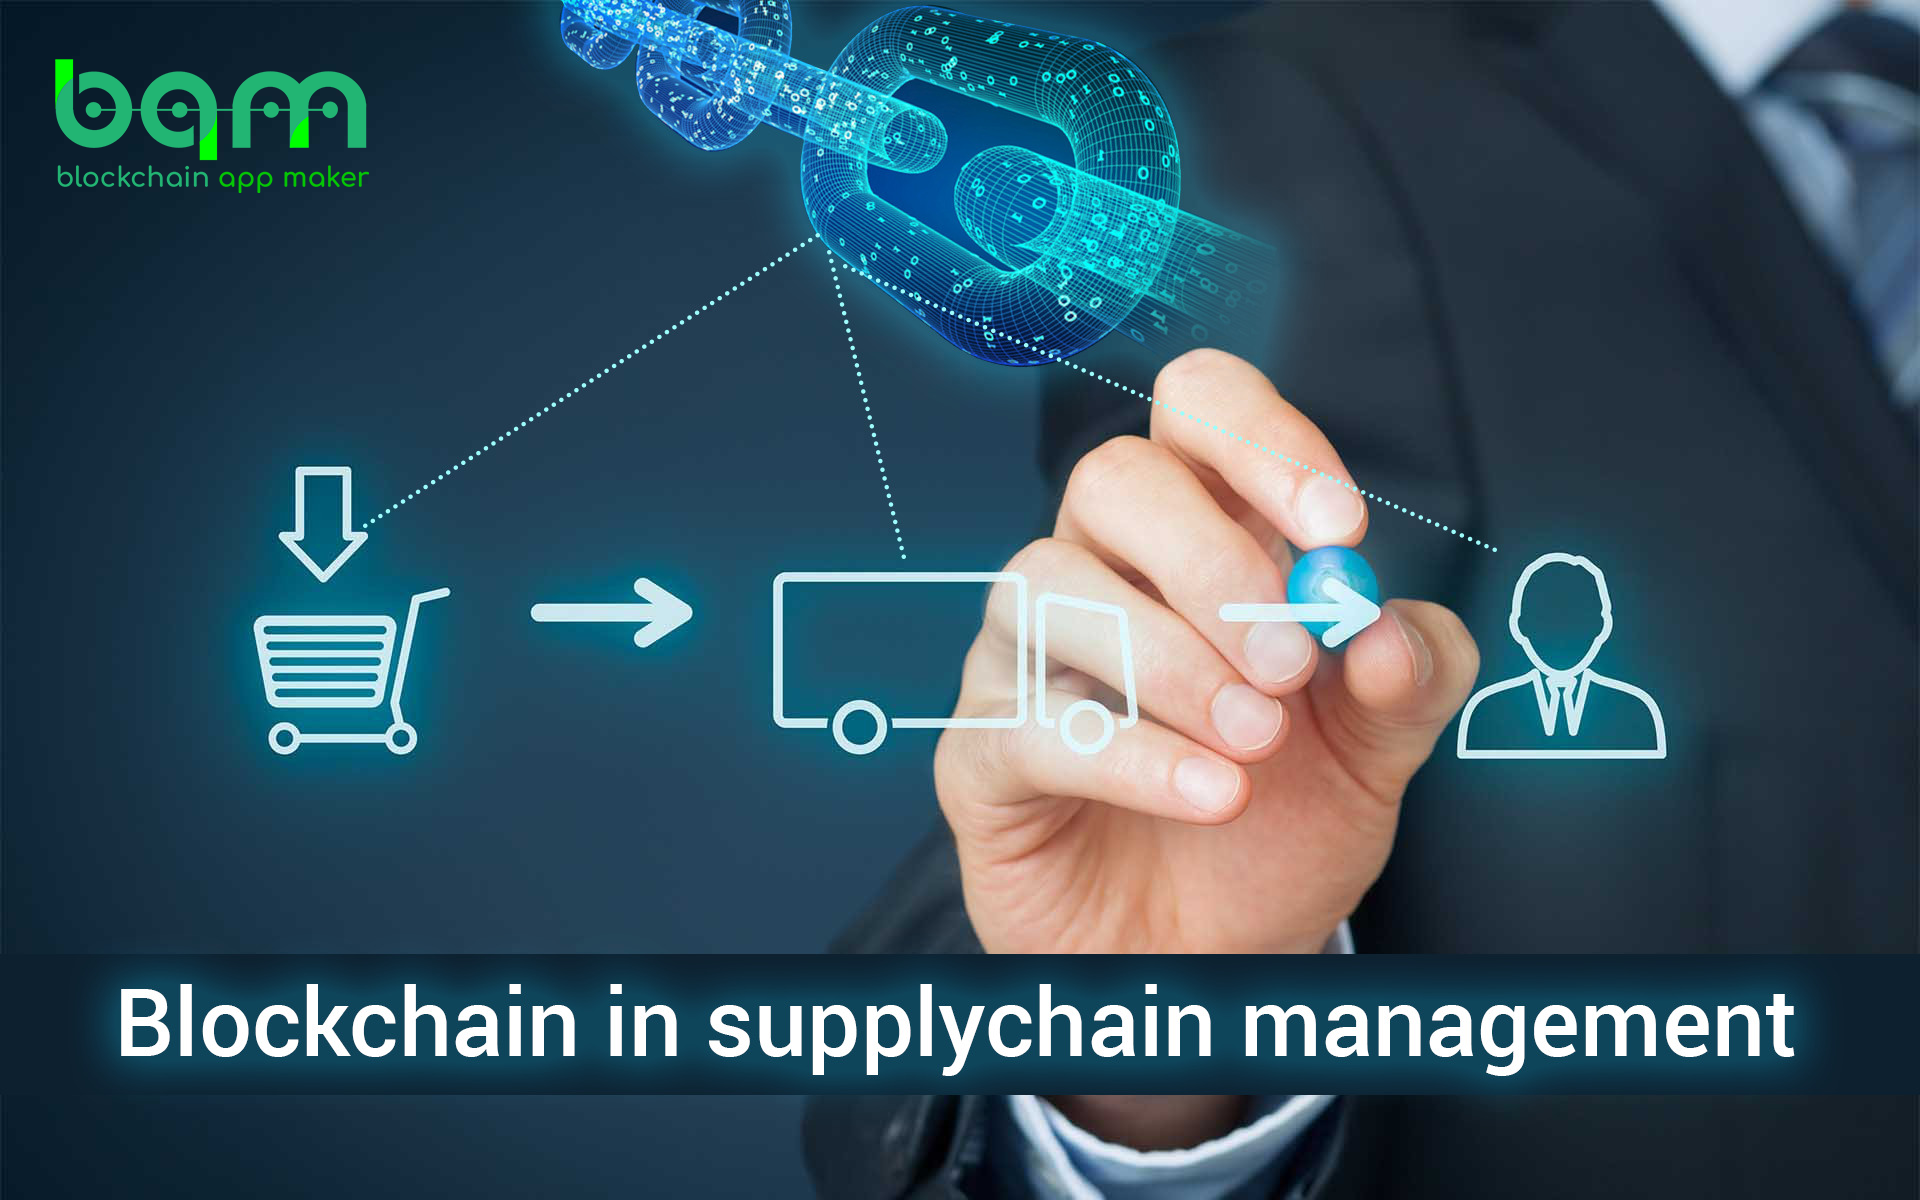 what are the adoption barriers of blockchain in supply chain management